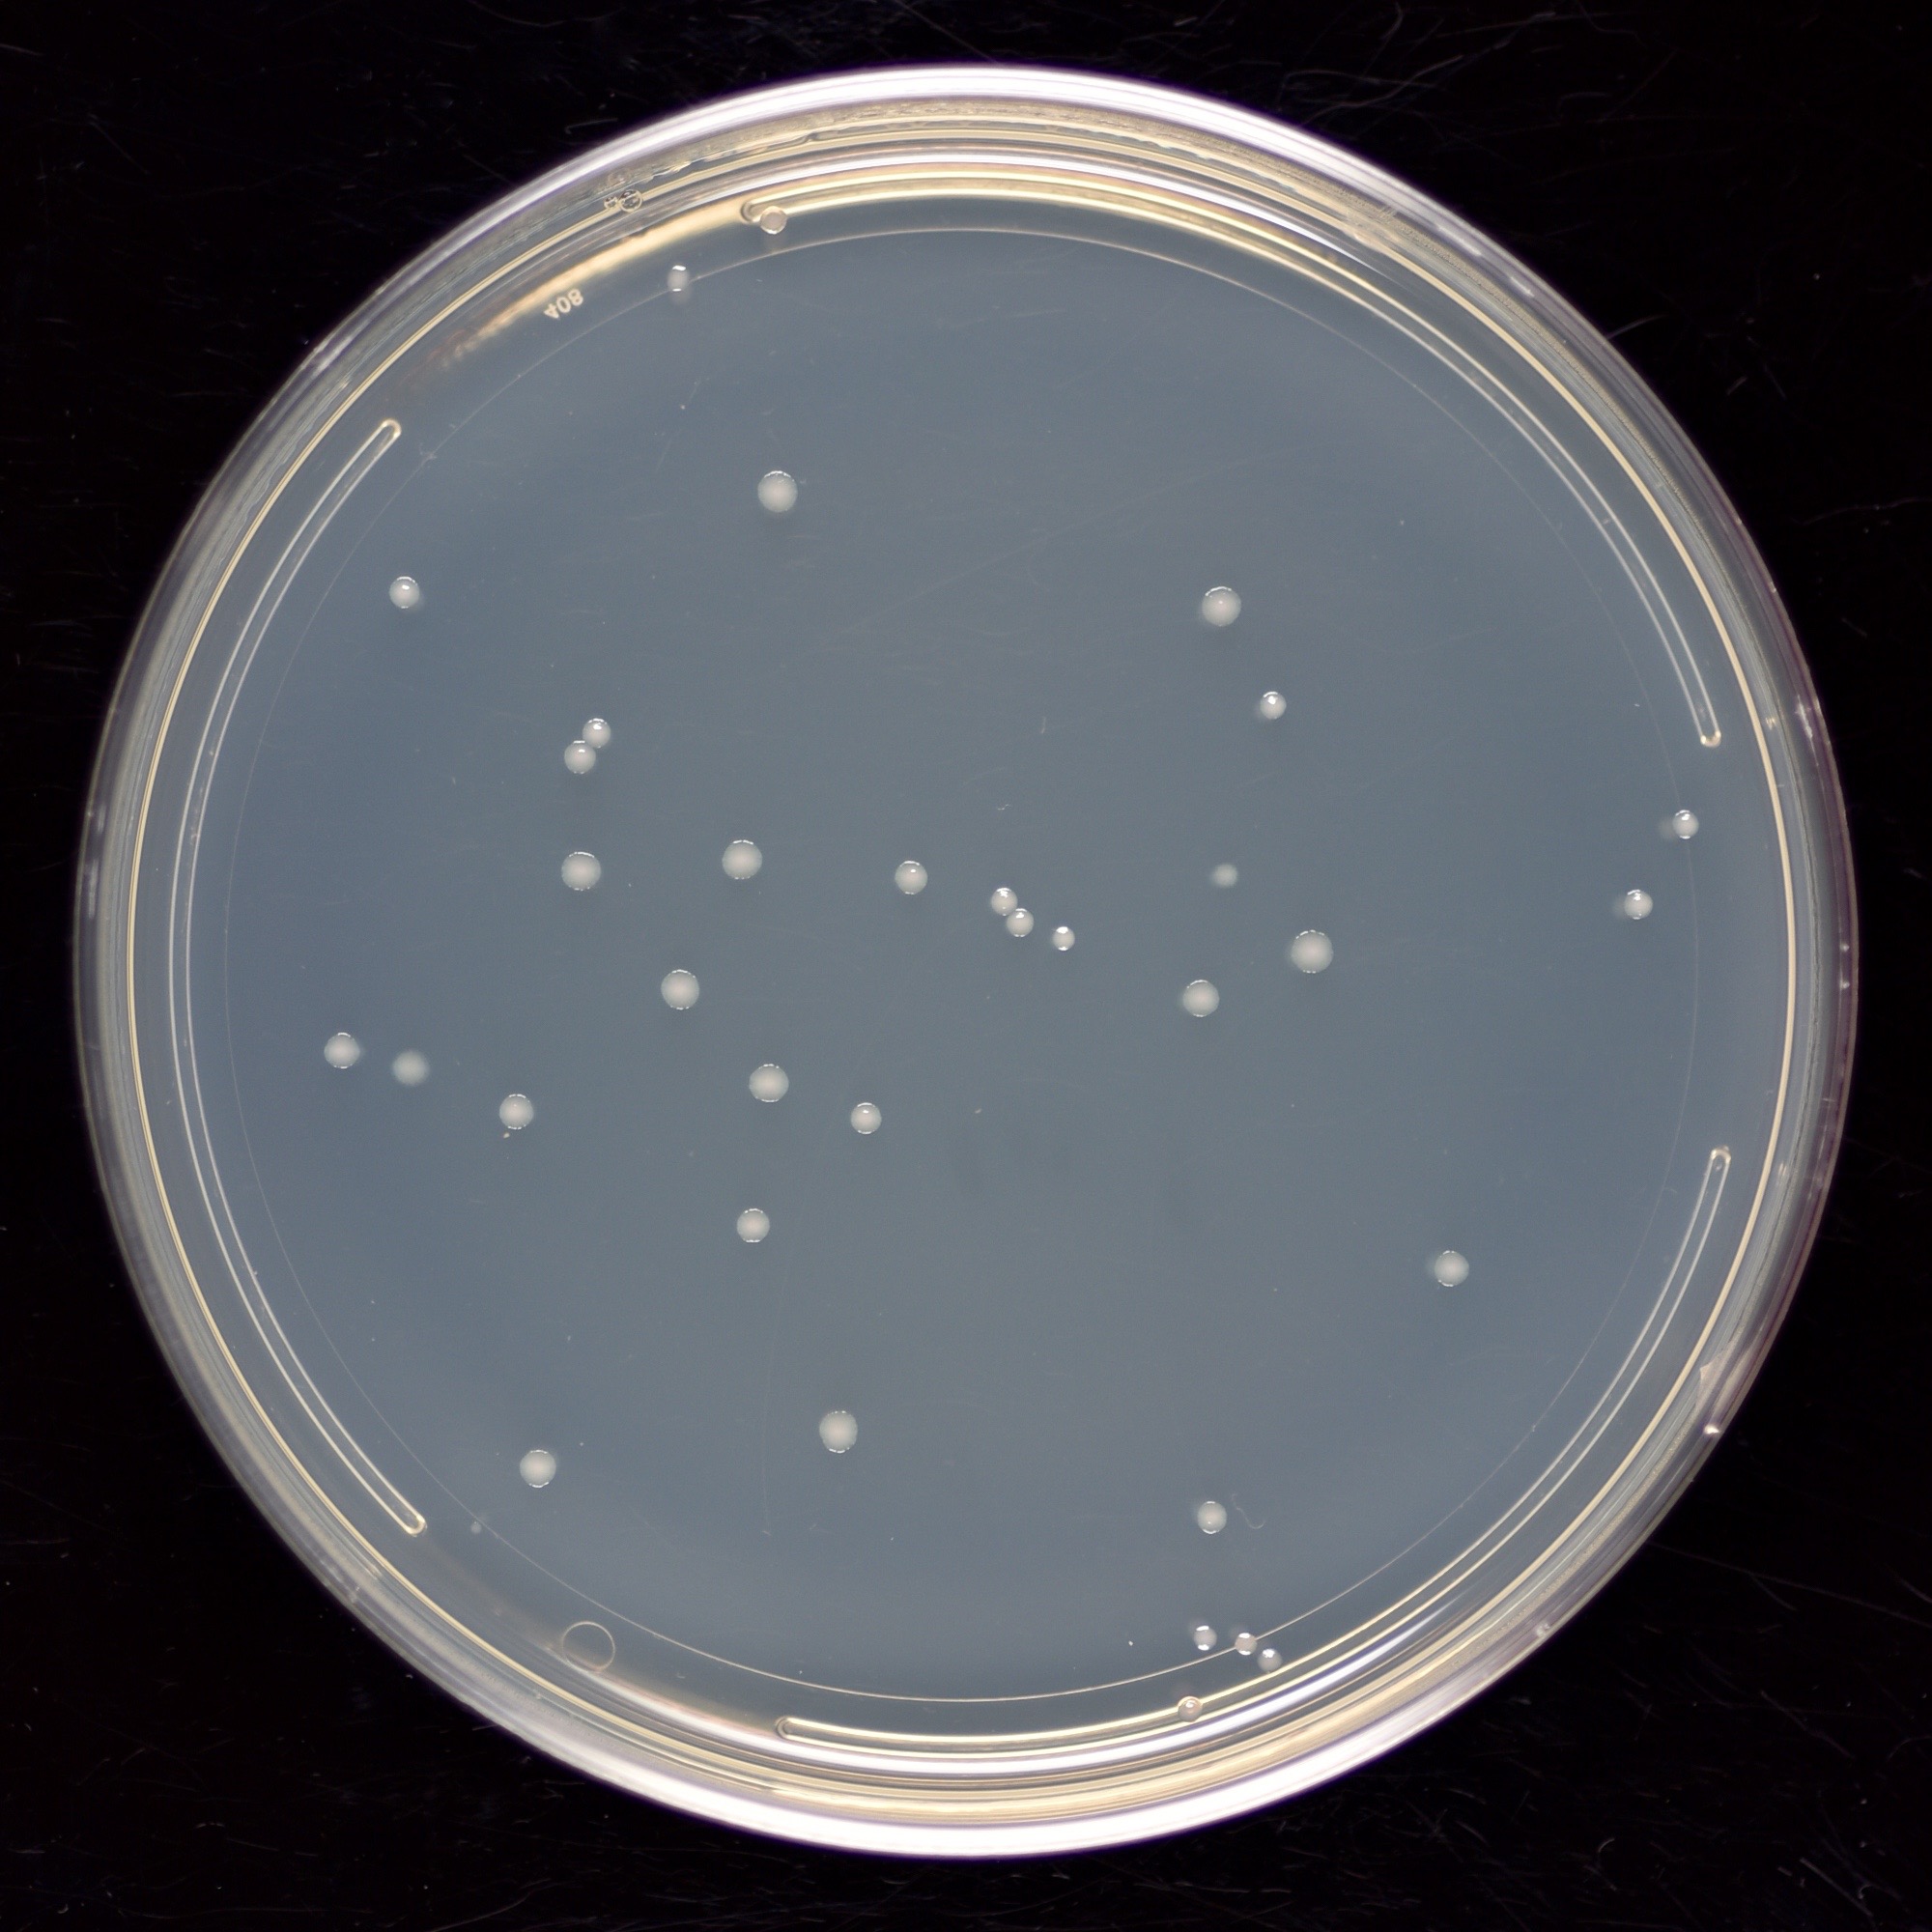 Colonies on a Plate - Science in the News